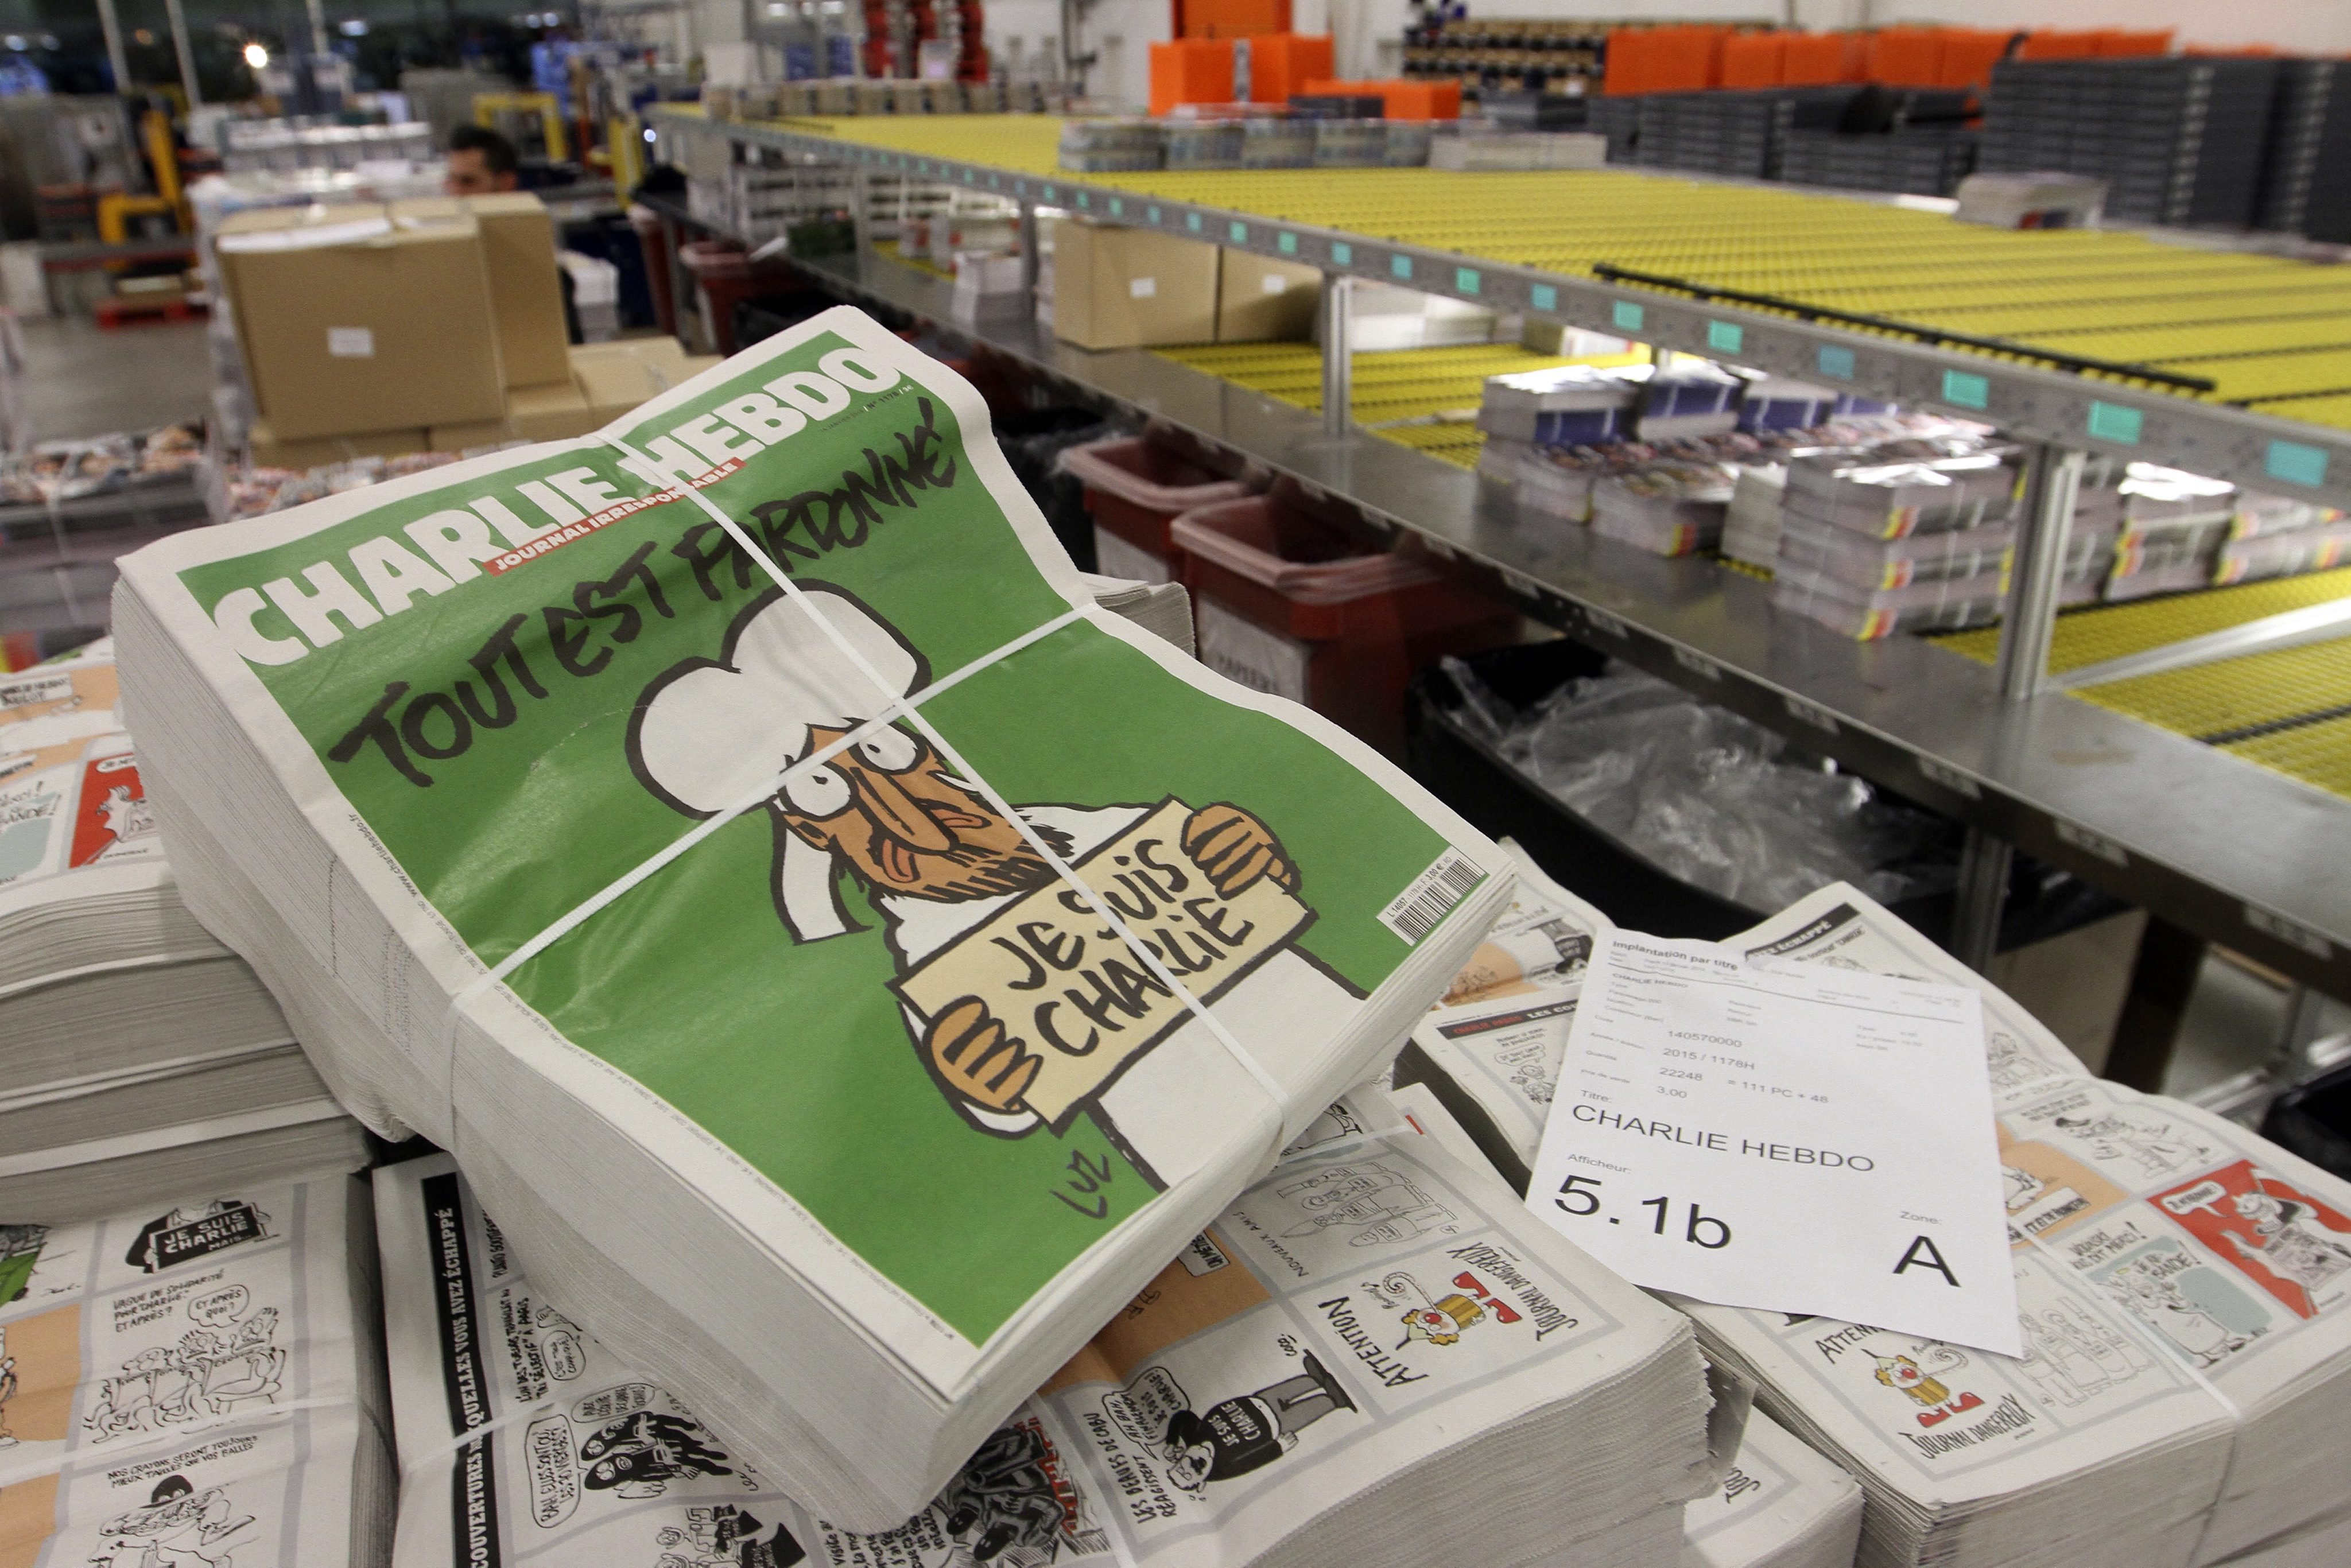 Copies of the upcoming edition of the French satirical magazine Charlie Hebdo are stacked at a distribution centre in Nantes, France, on Jan 13, 2014.